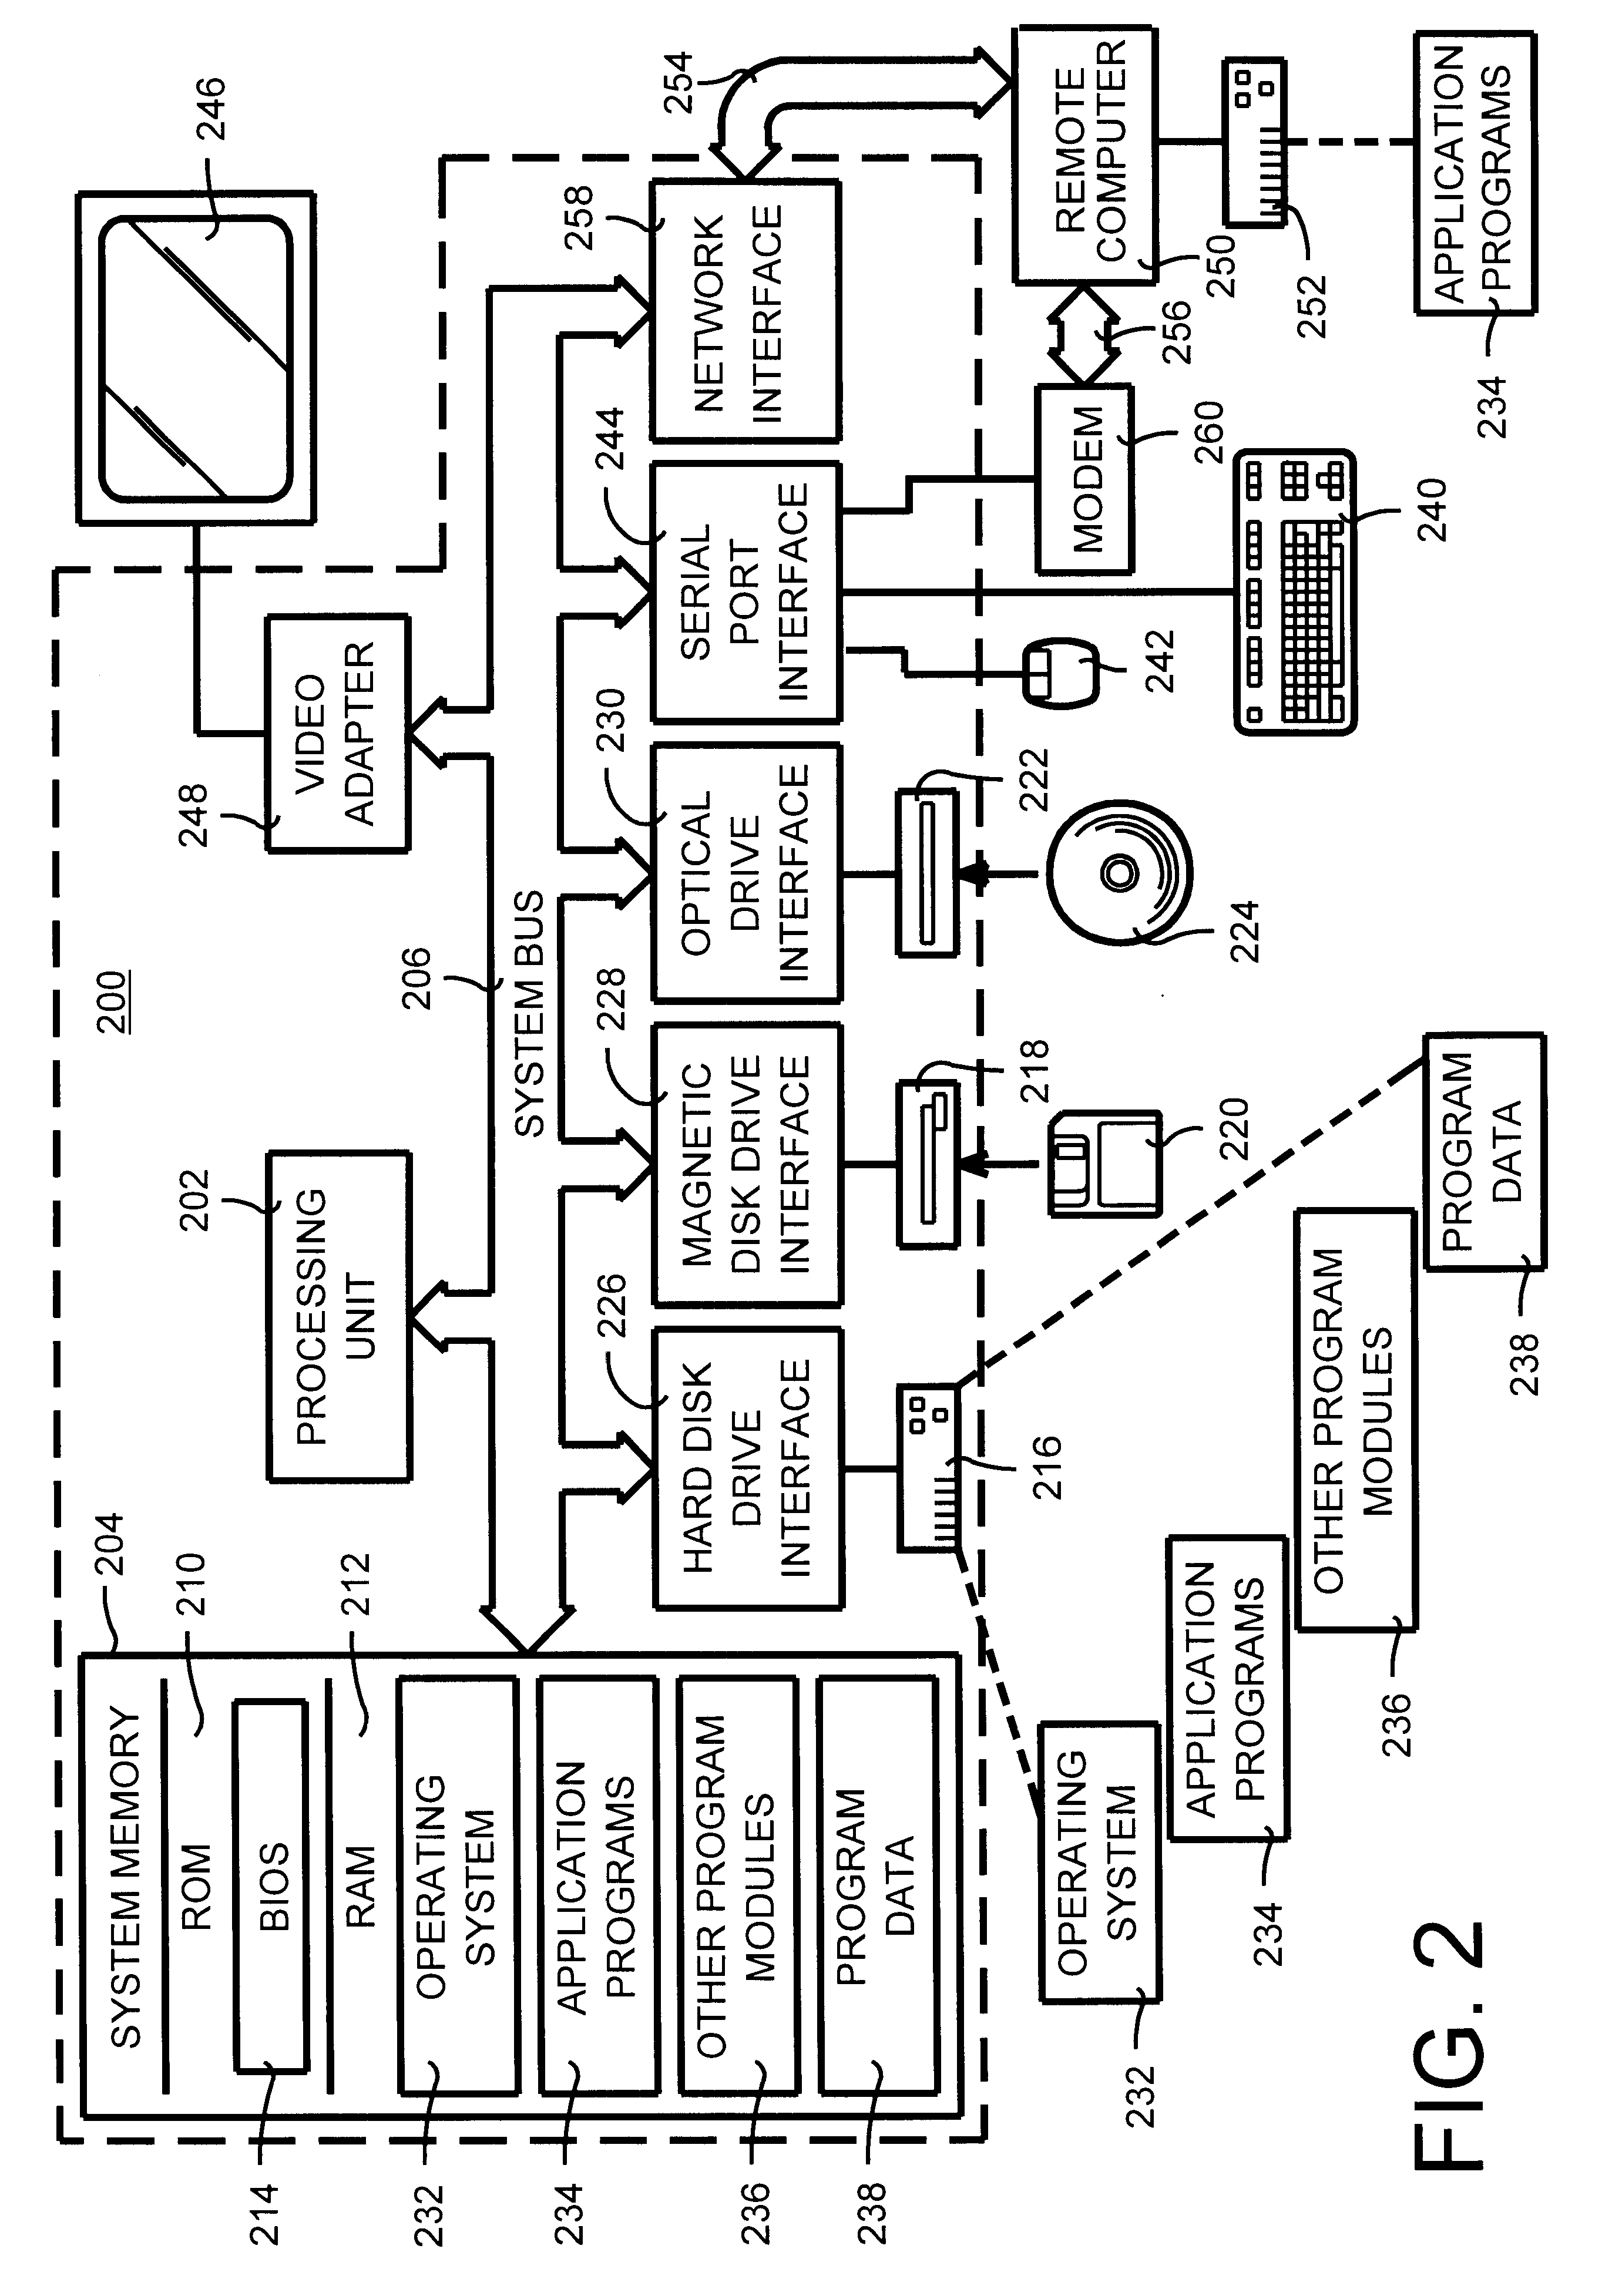 Computer network testing system and method using client playback of edited network information